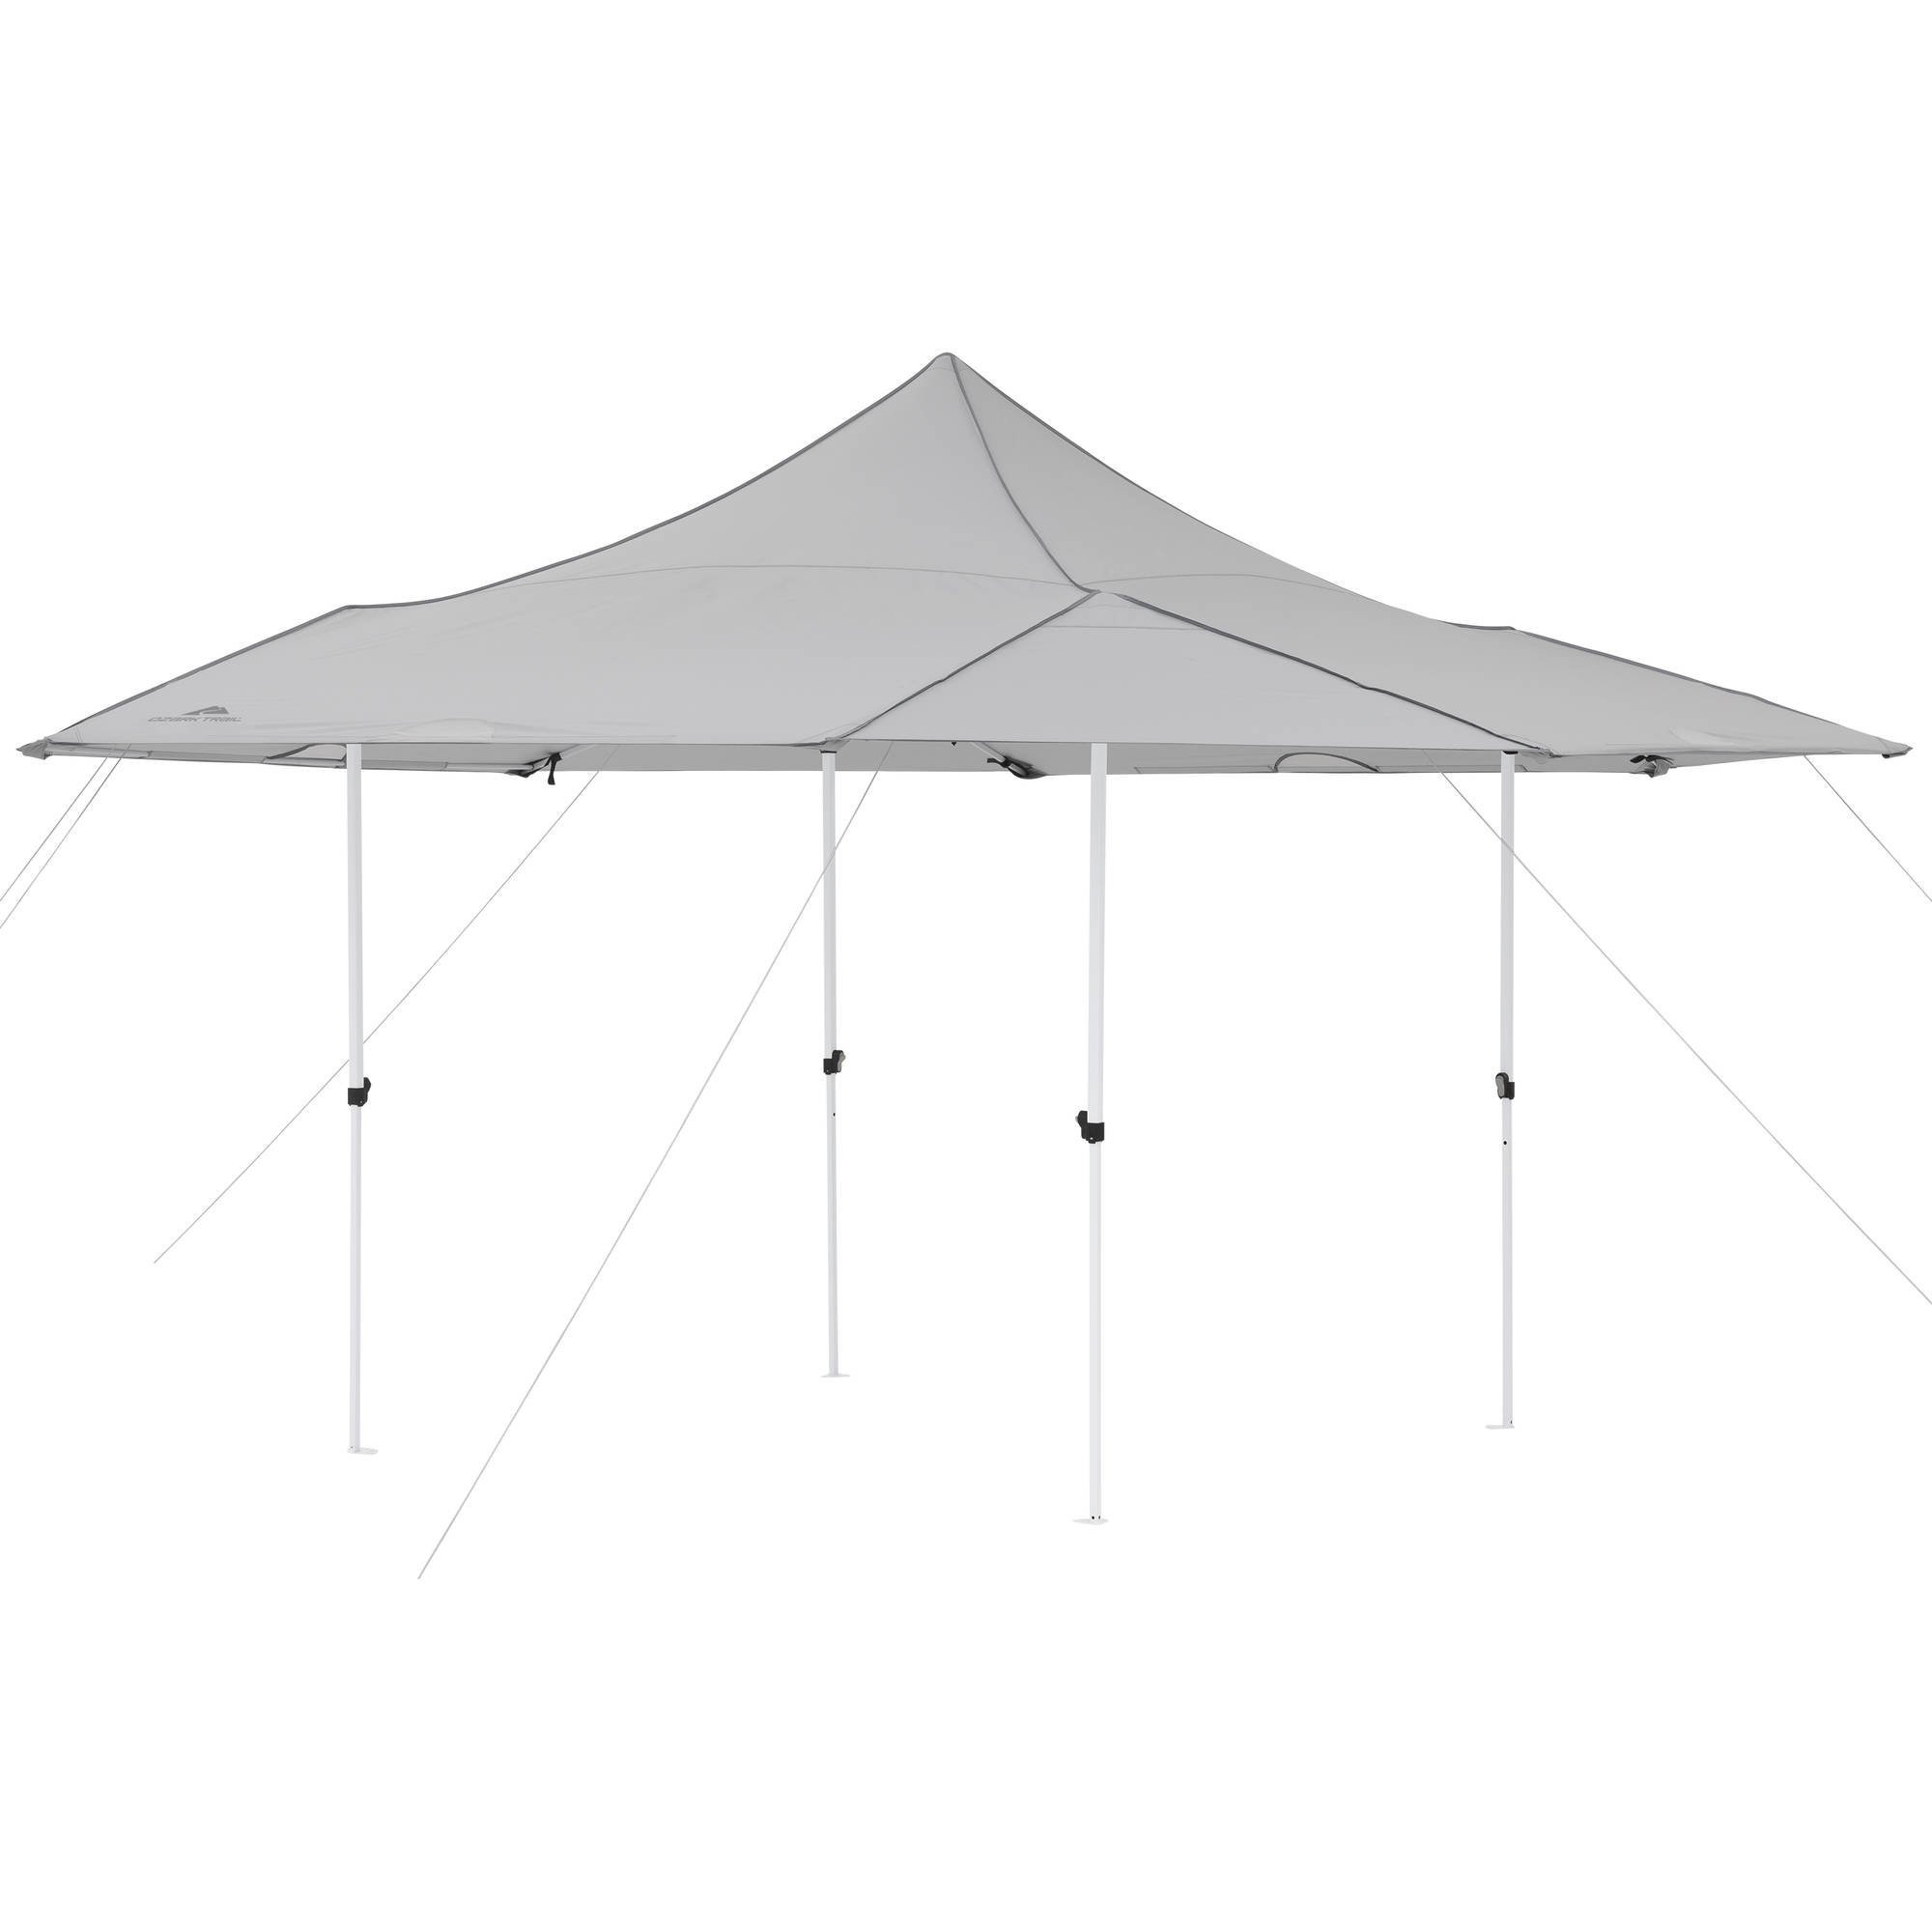 Ozark Trail 16' x 16' Instant Canopy with Convertible Walls, Gray